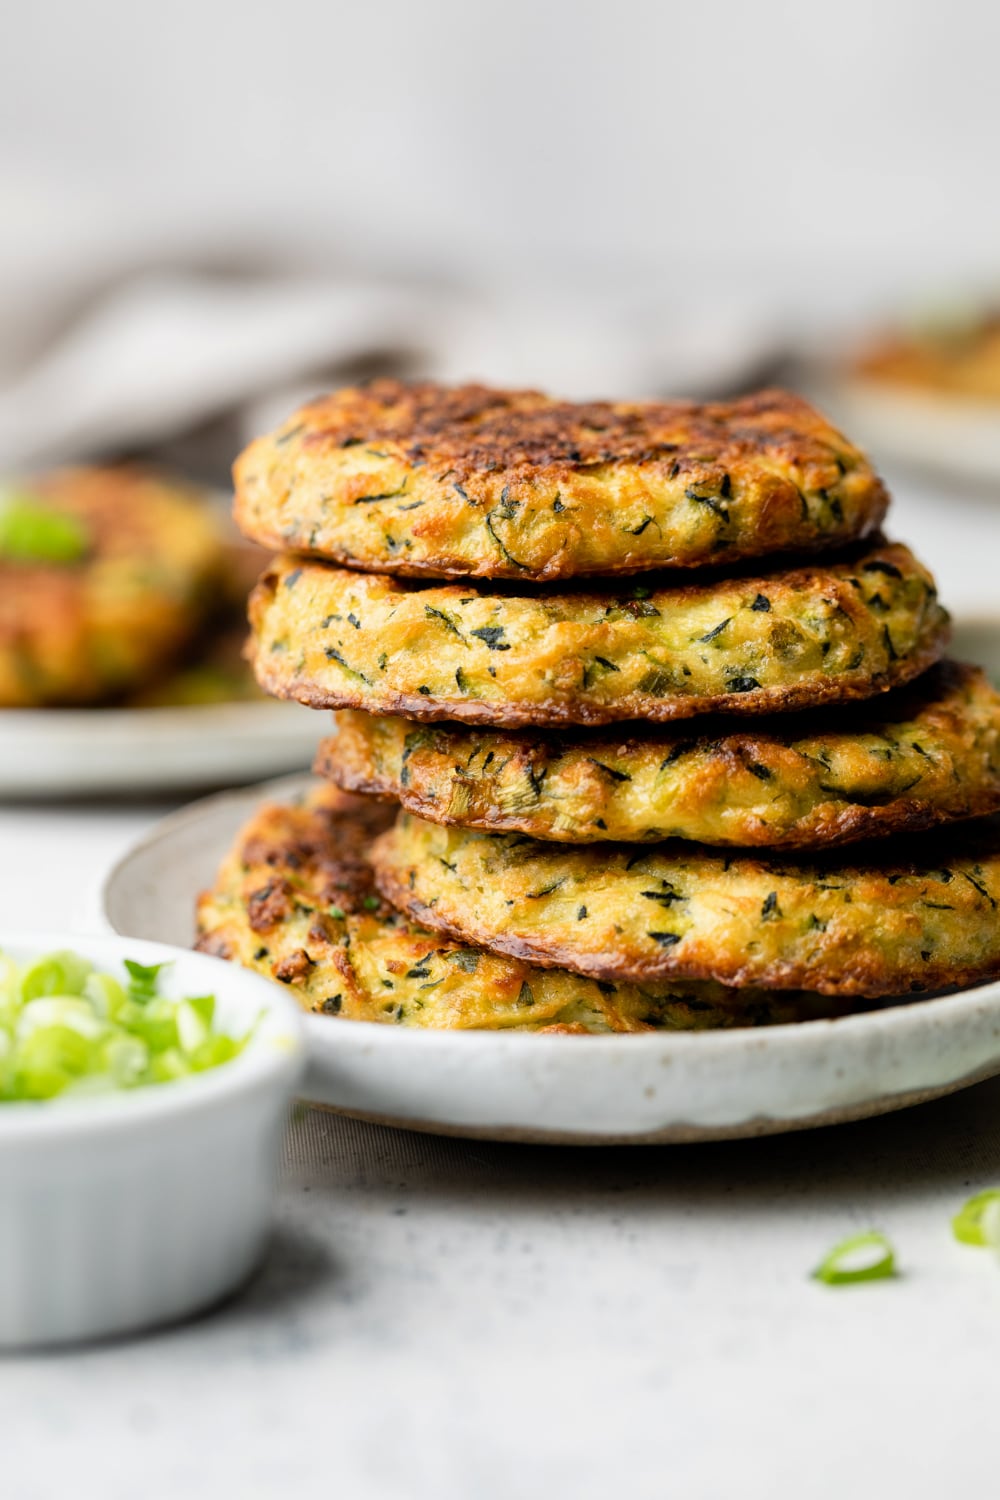 Stack of oven baked zucchini fritters on a plate.